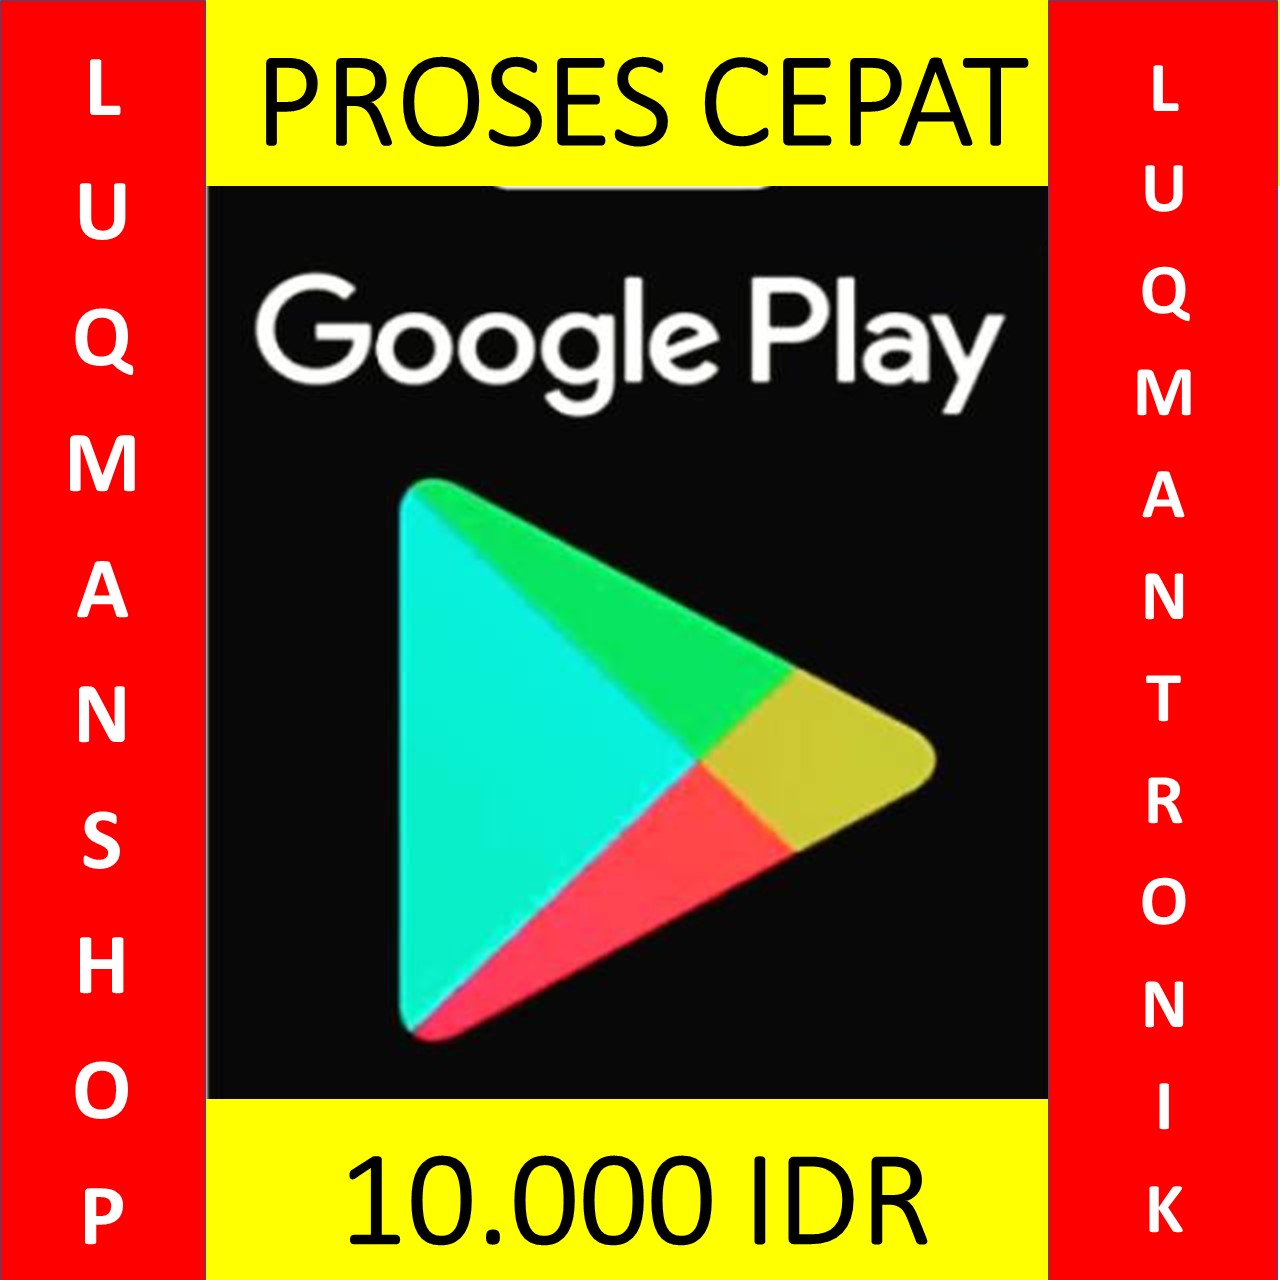 Voucher Game GOOGLE PLAY INDONESIA - Google Play Gift Card Indonesia Rp. 10.000